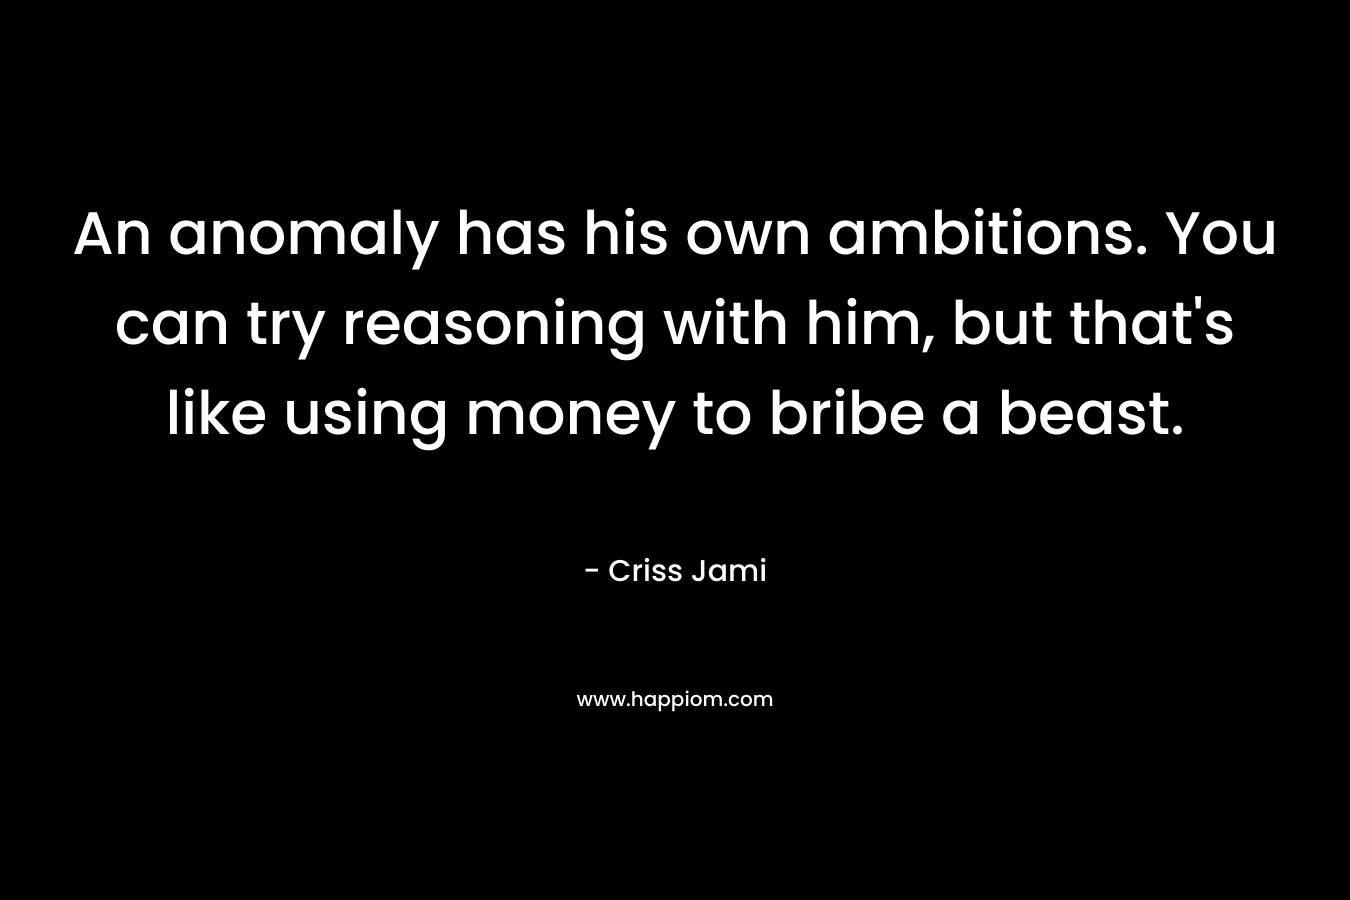 An anomaly has his own ambitions. You can try reasoning with him, but that's like using money to bribe a beast.